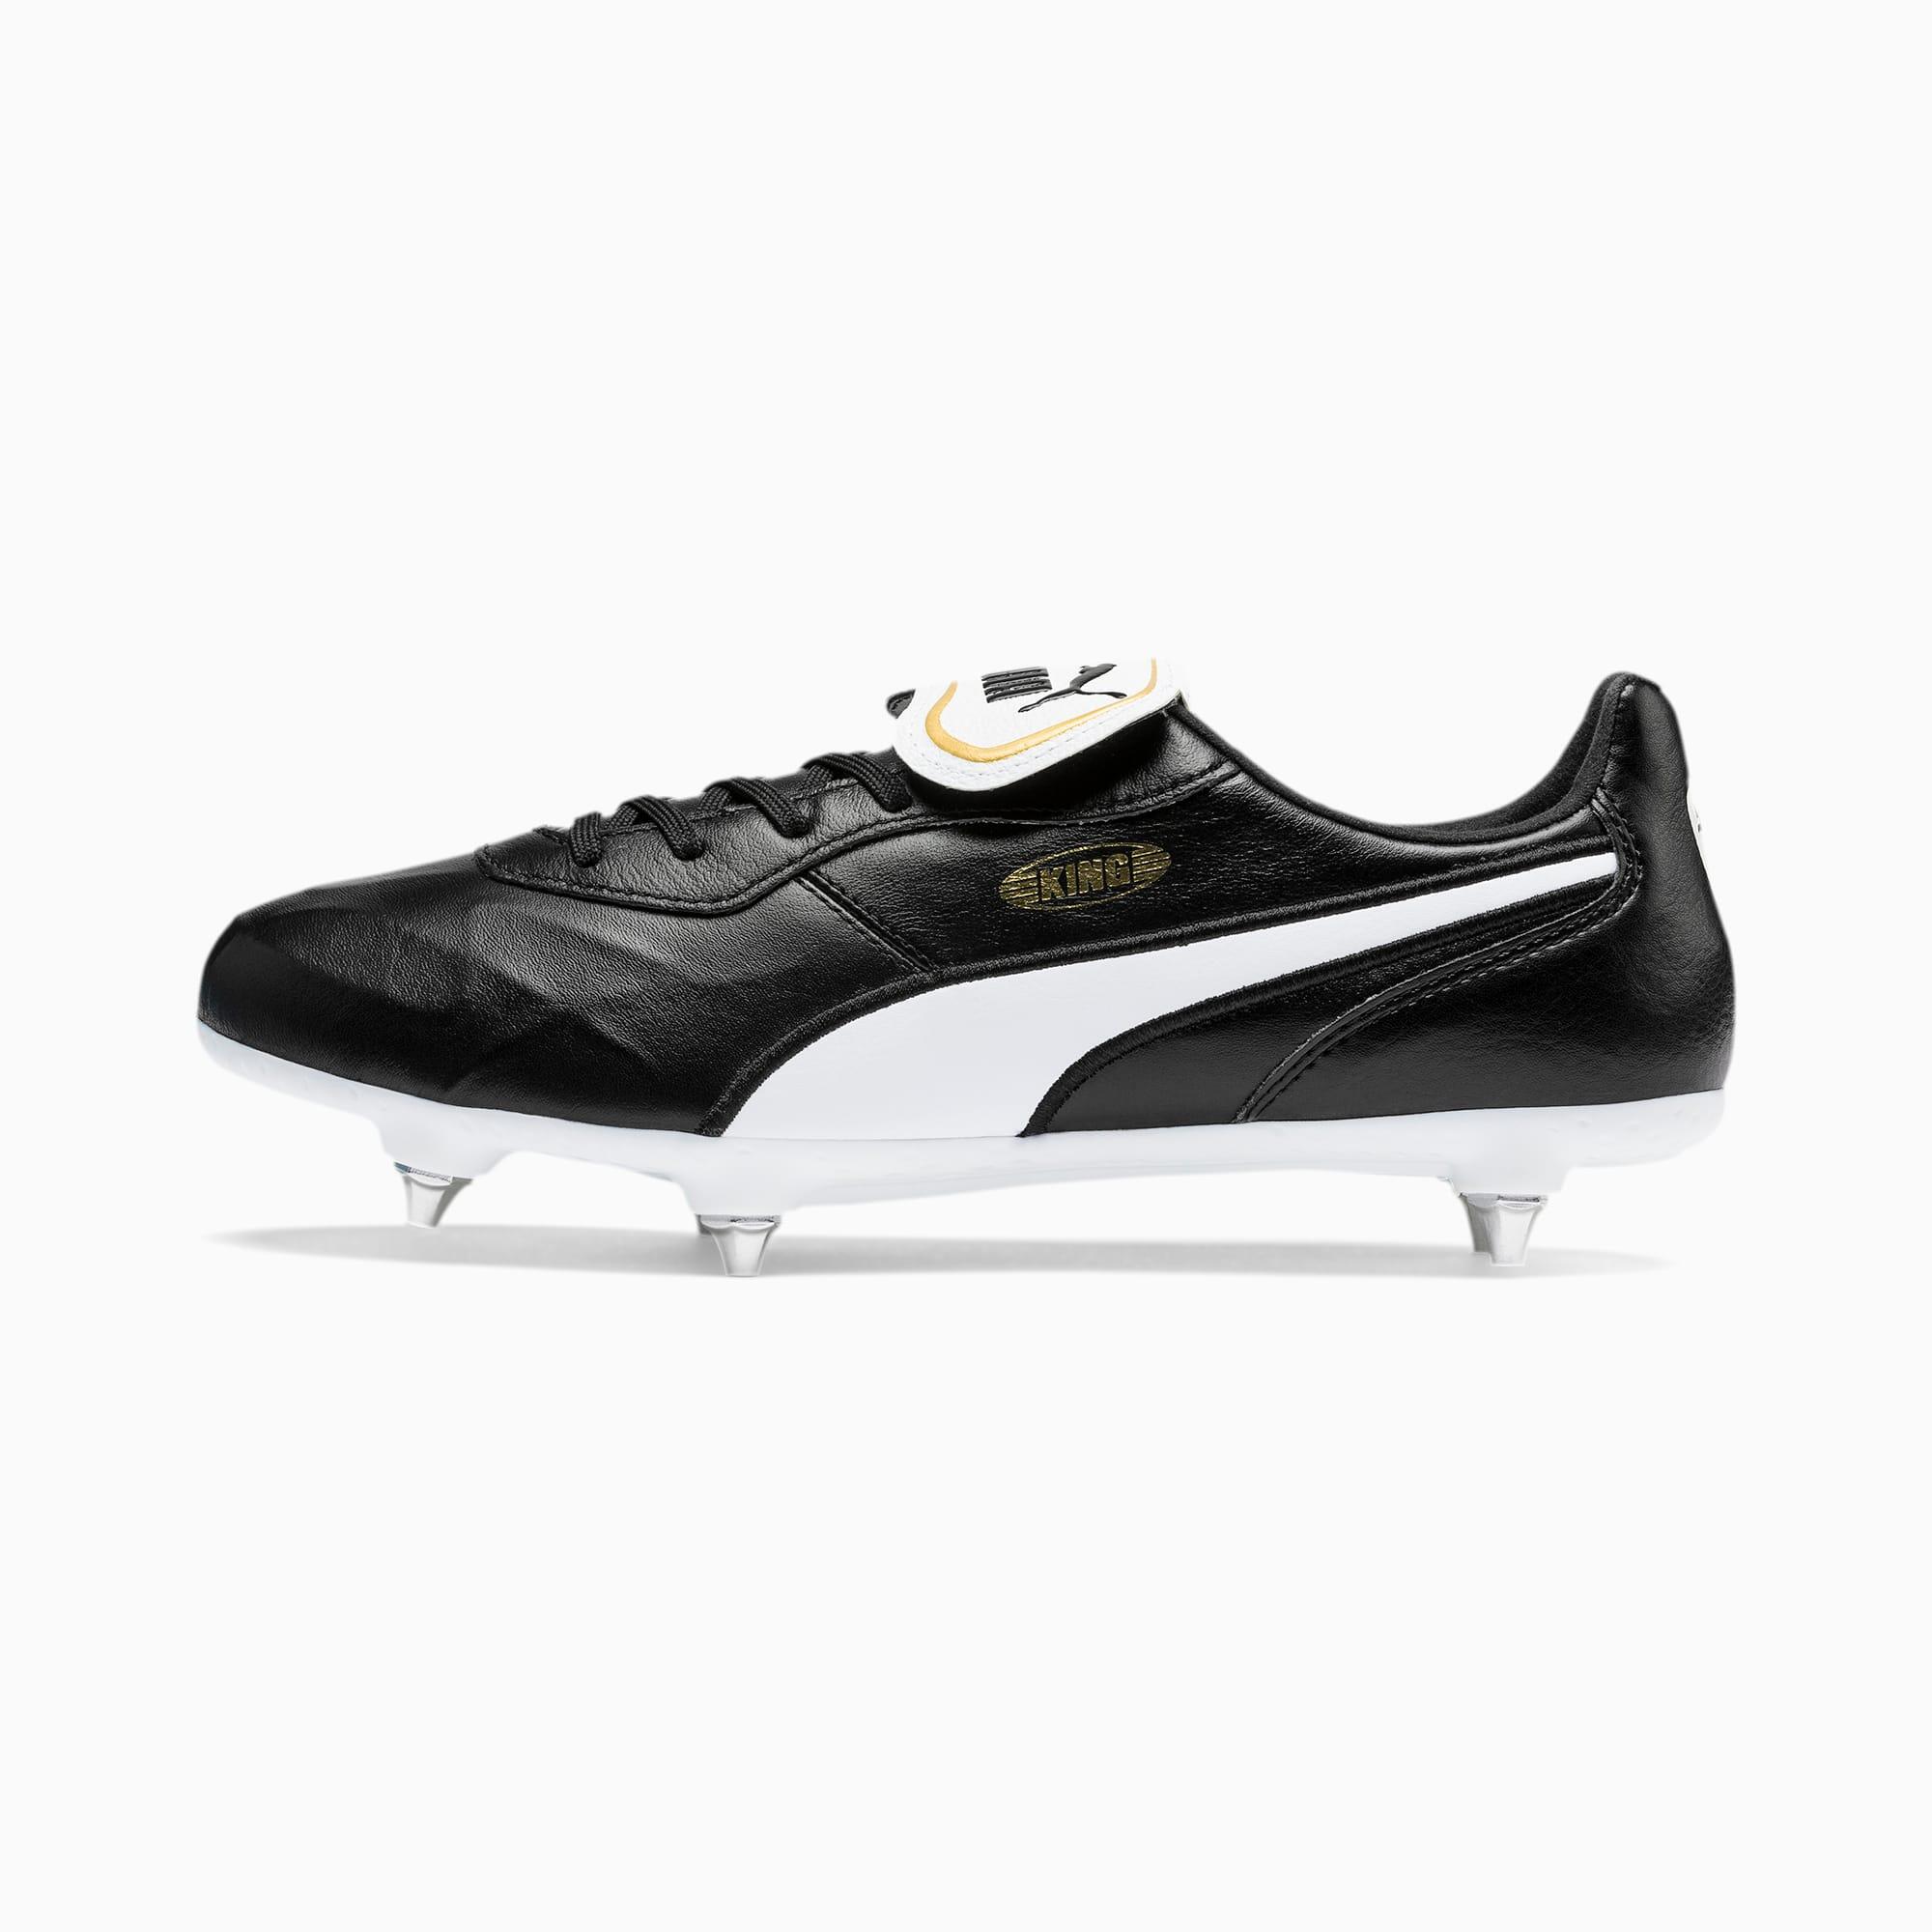 Mens King Top Leather Football Boots (Black/White) 3/4